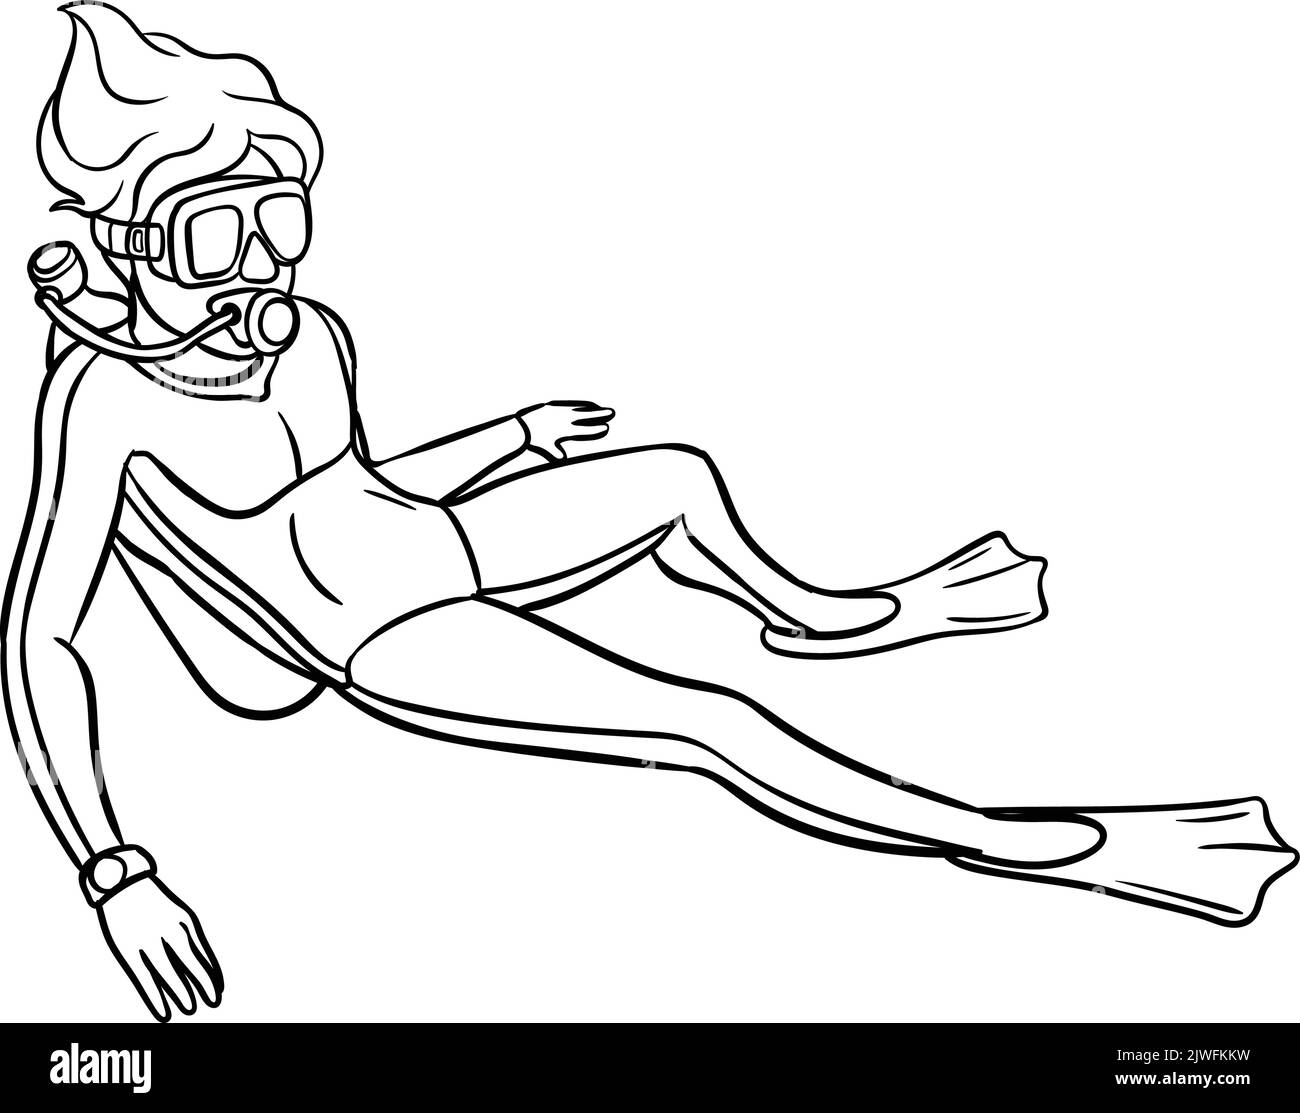 Scuba Diving Isolated Coloring Page für Kinder Stock Vektor